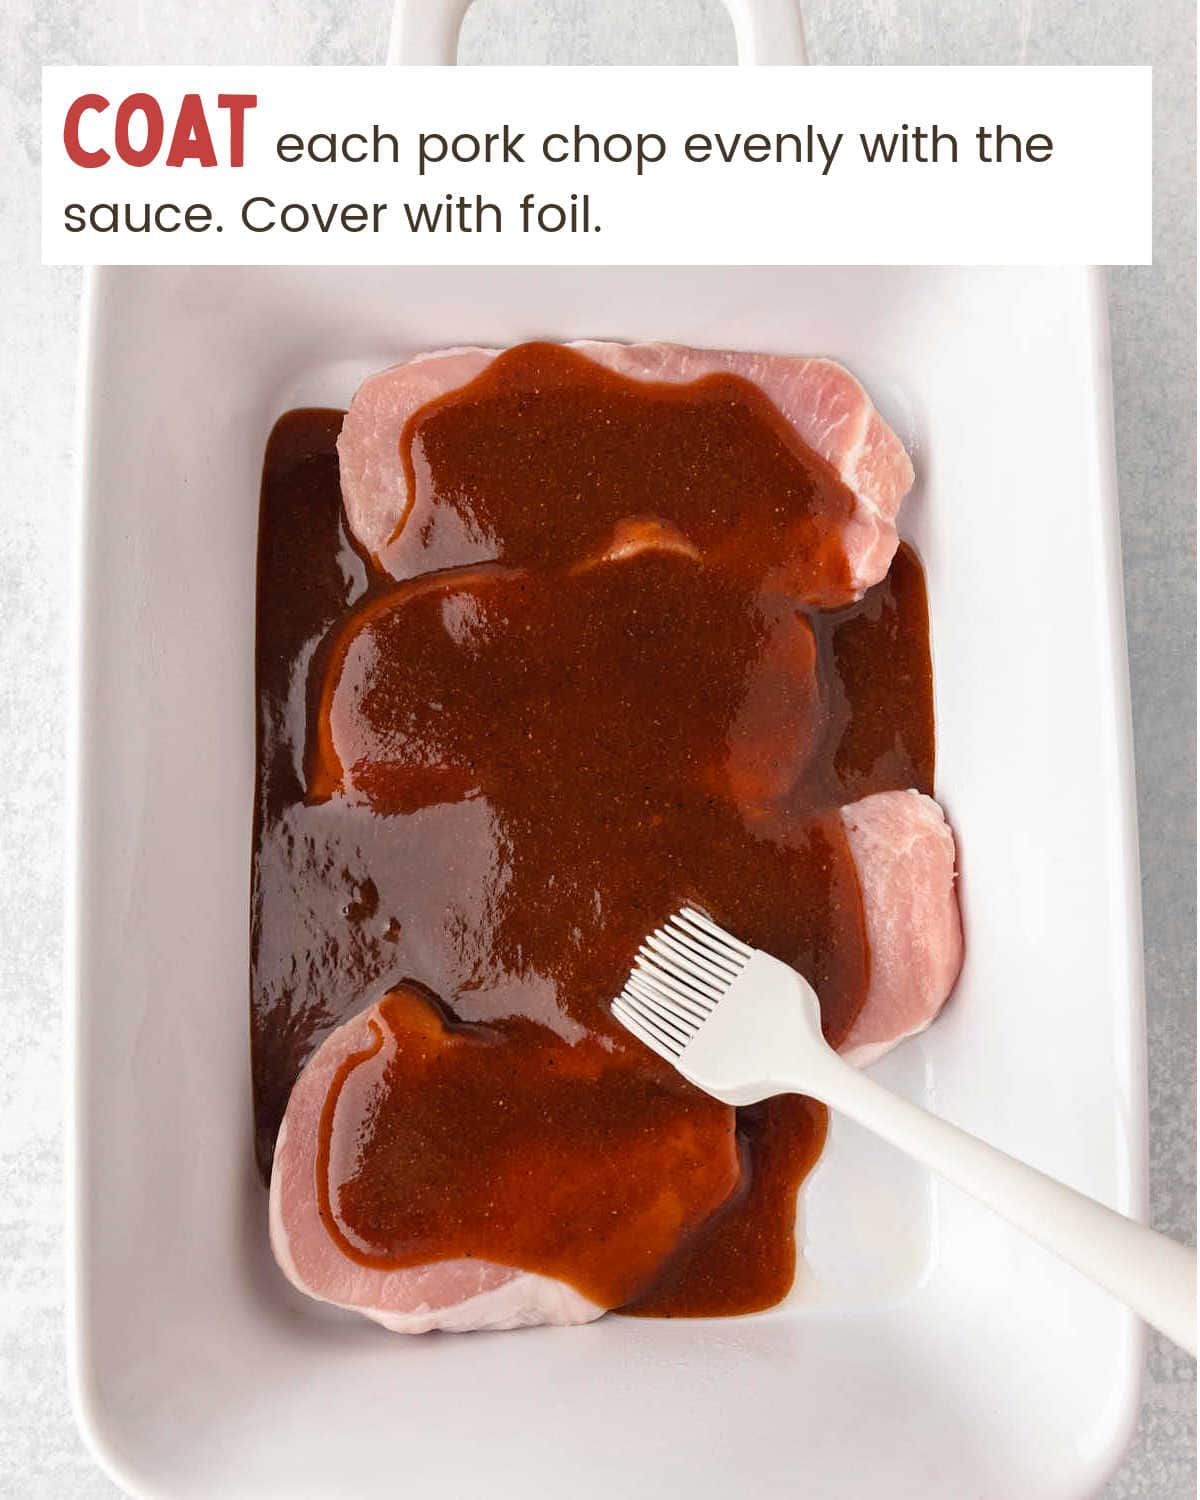 A dish with pork chops covered in bbq sauce and a fork.